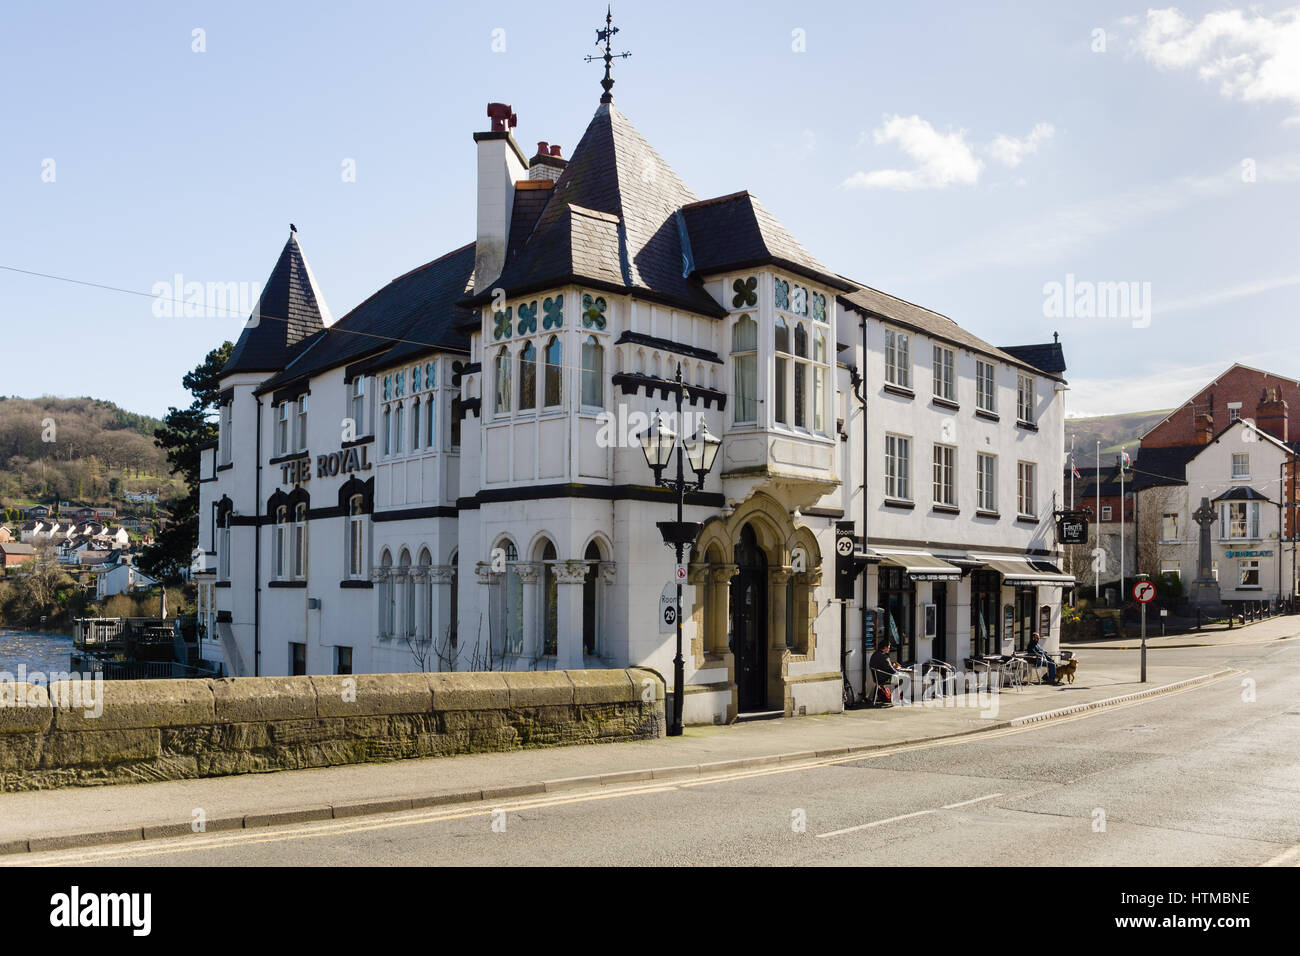 The Royal Hotel on Castle Street Llangollen overlooking the River Dee built in 1752 and once hosted Queen Victoria. Stock Photo